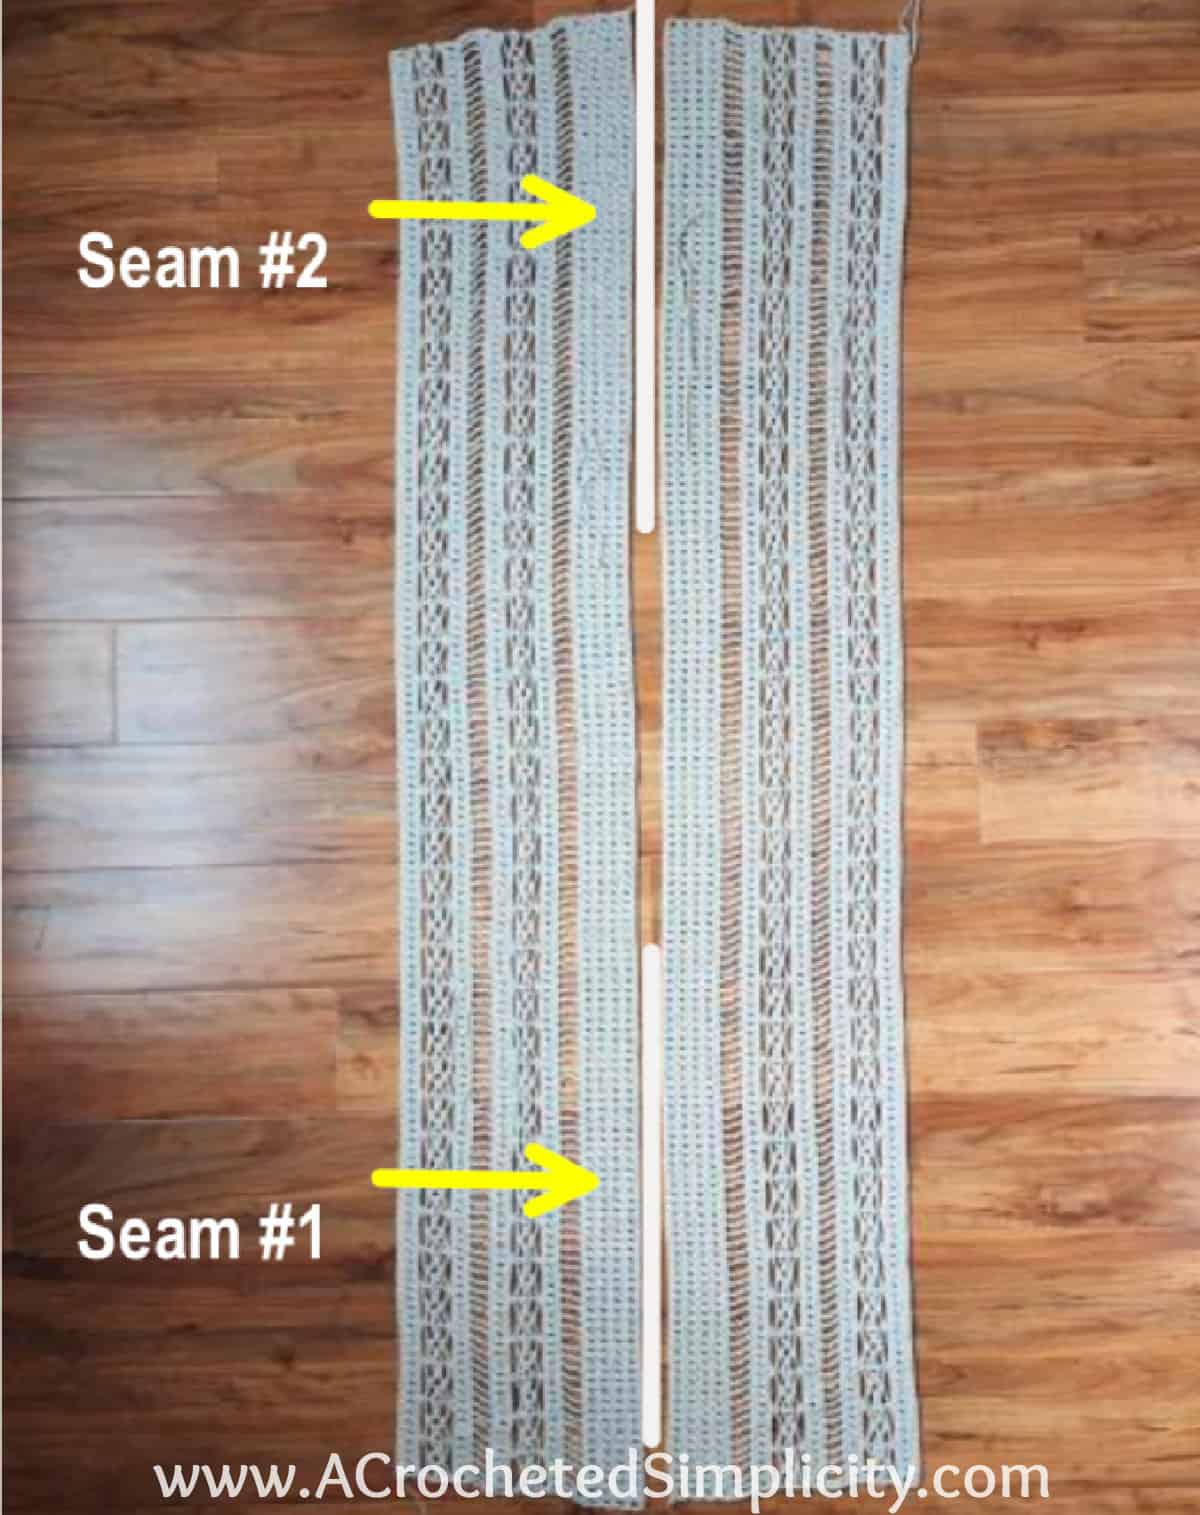 Two panels of a crochet swim cover up laid flat on wood floor to seam them.